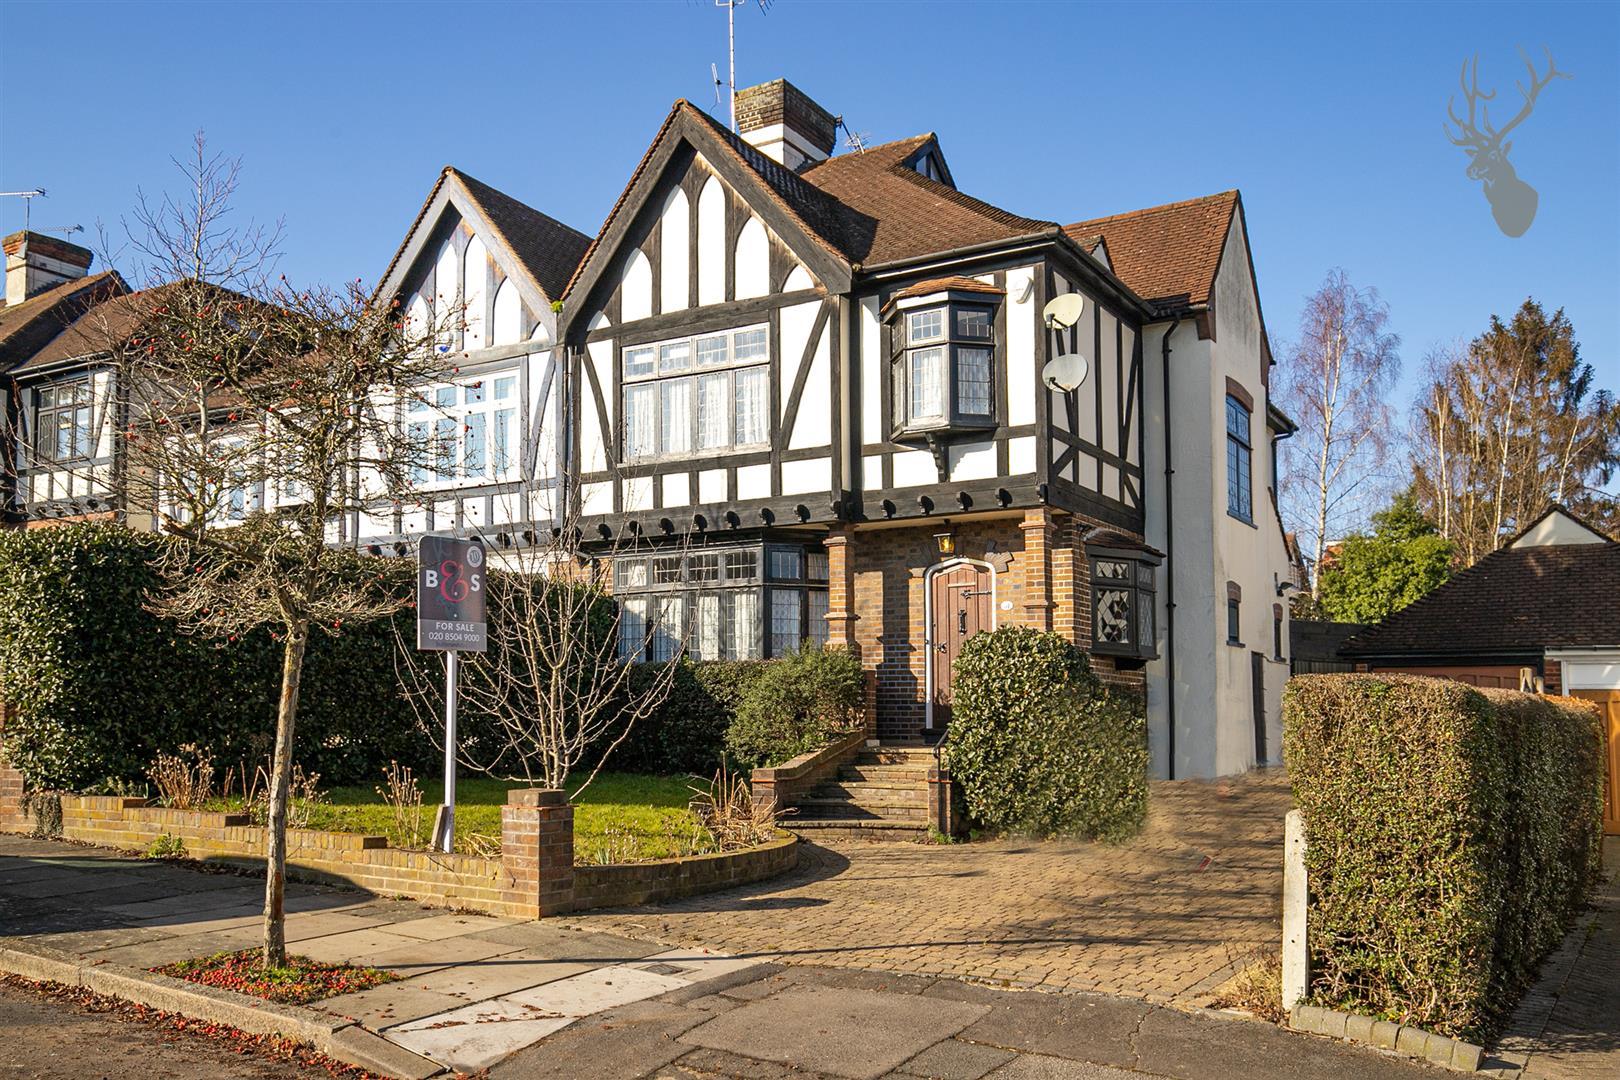 Similar Property: House in Woodford Green